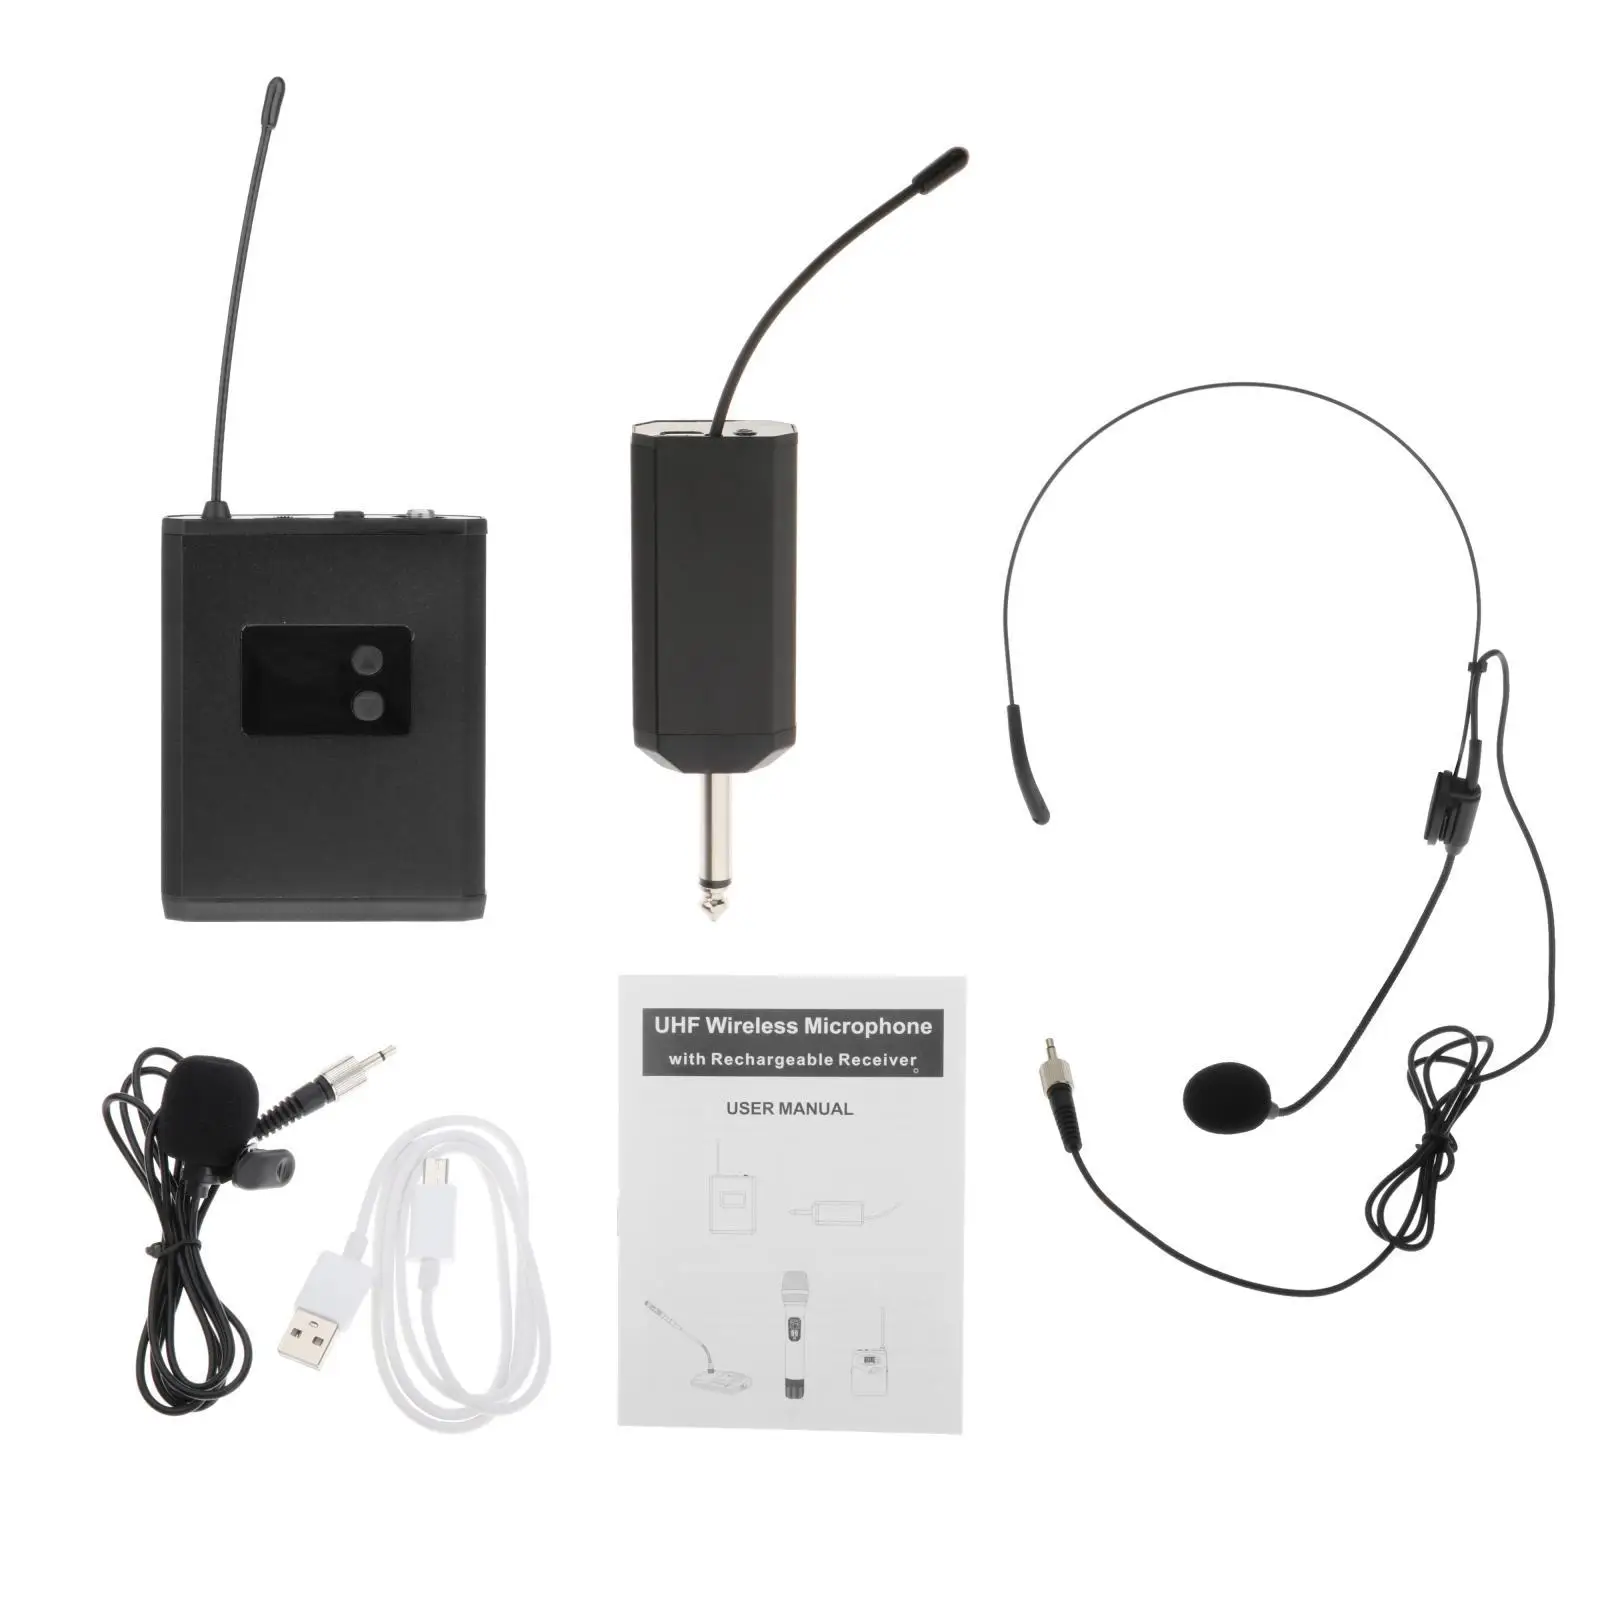 Rechargeable Receiver Wireless Microphone for Recording